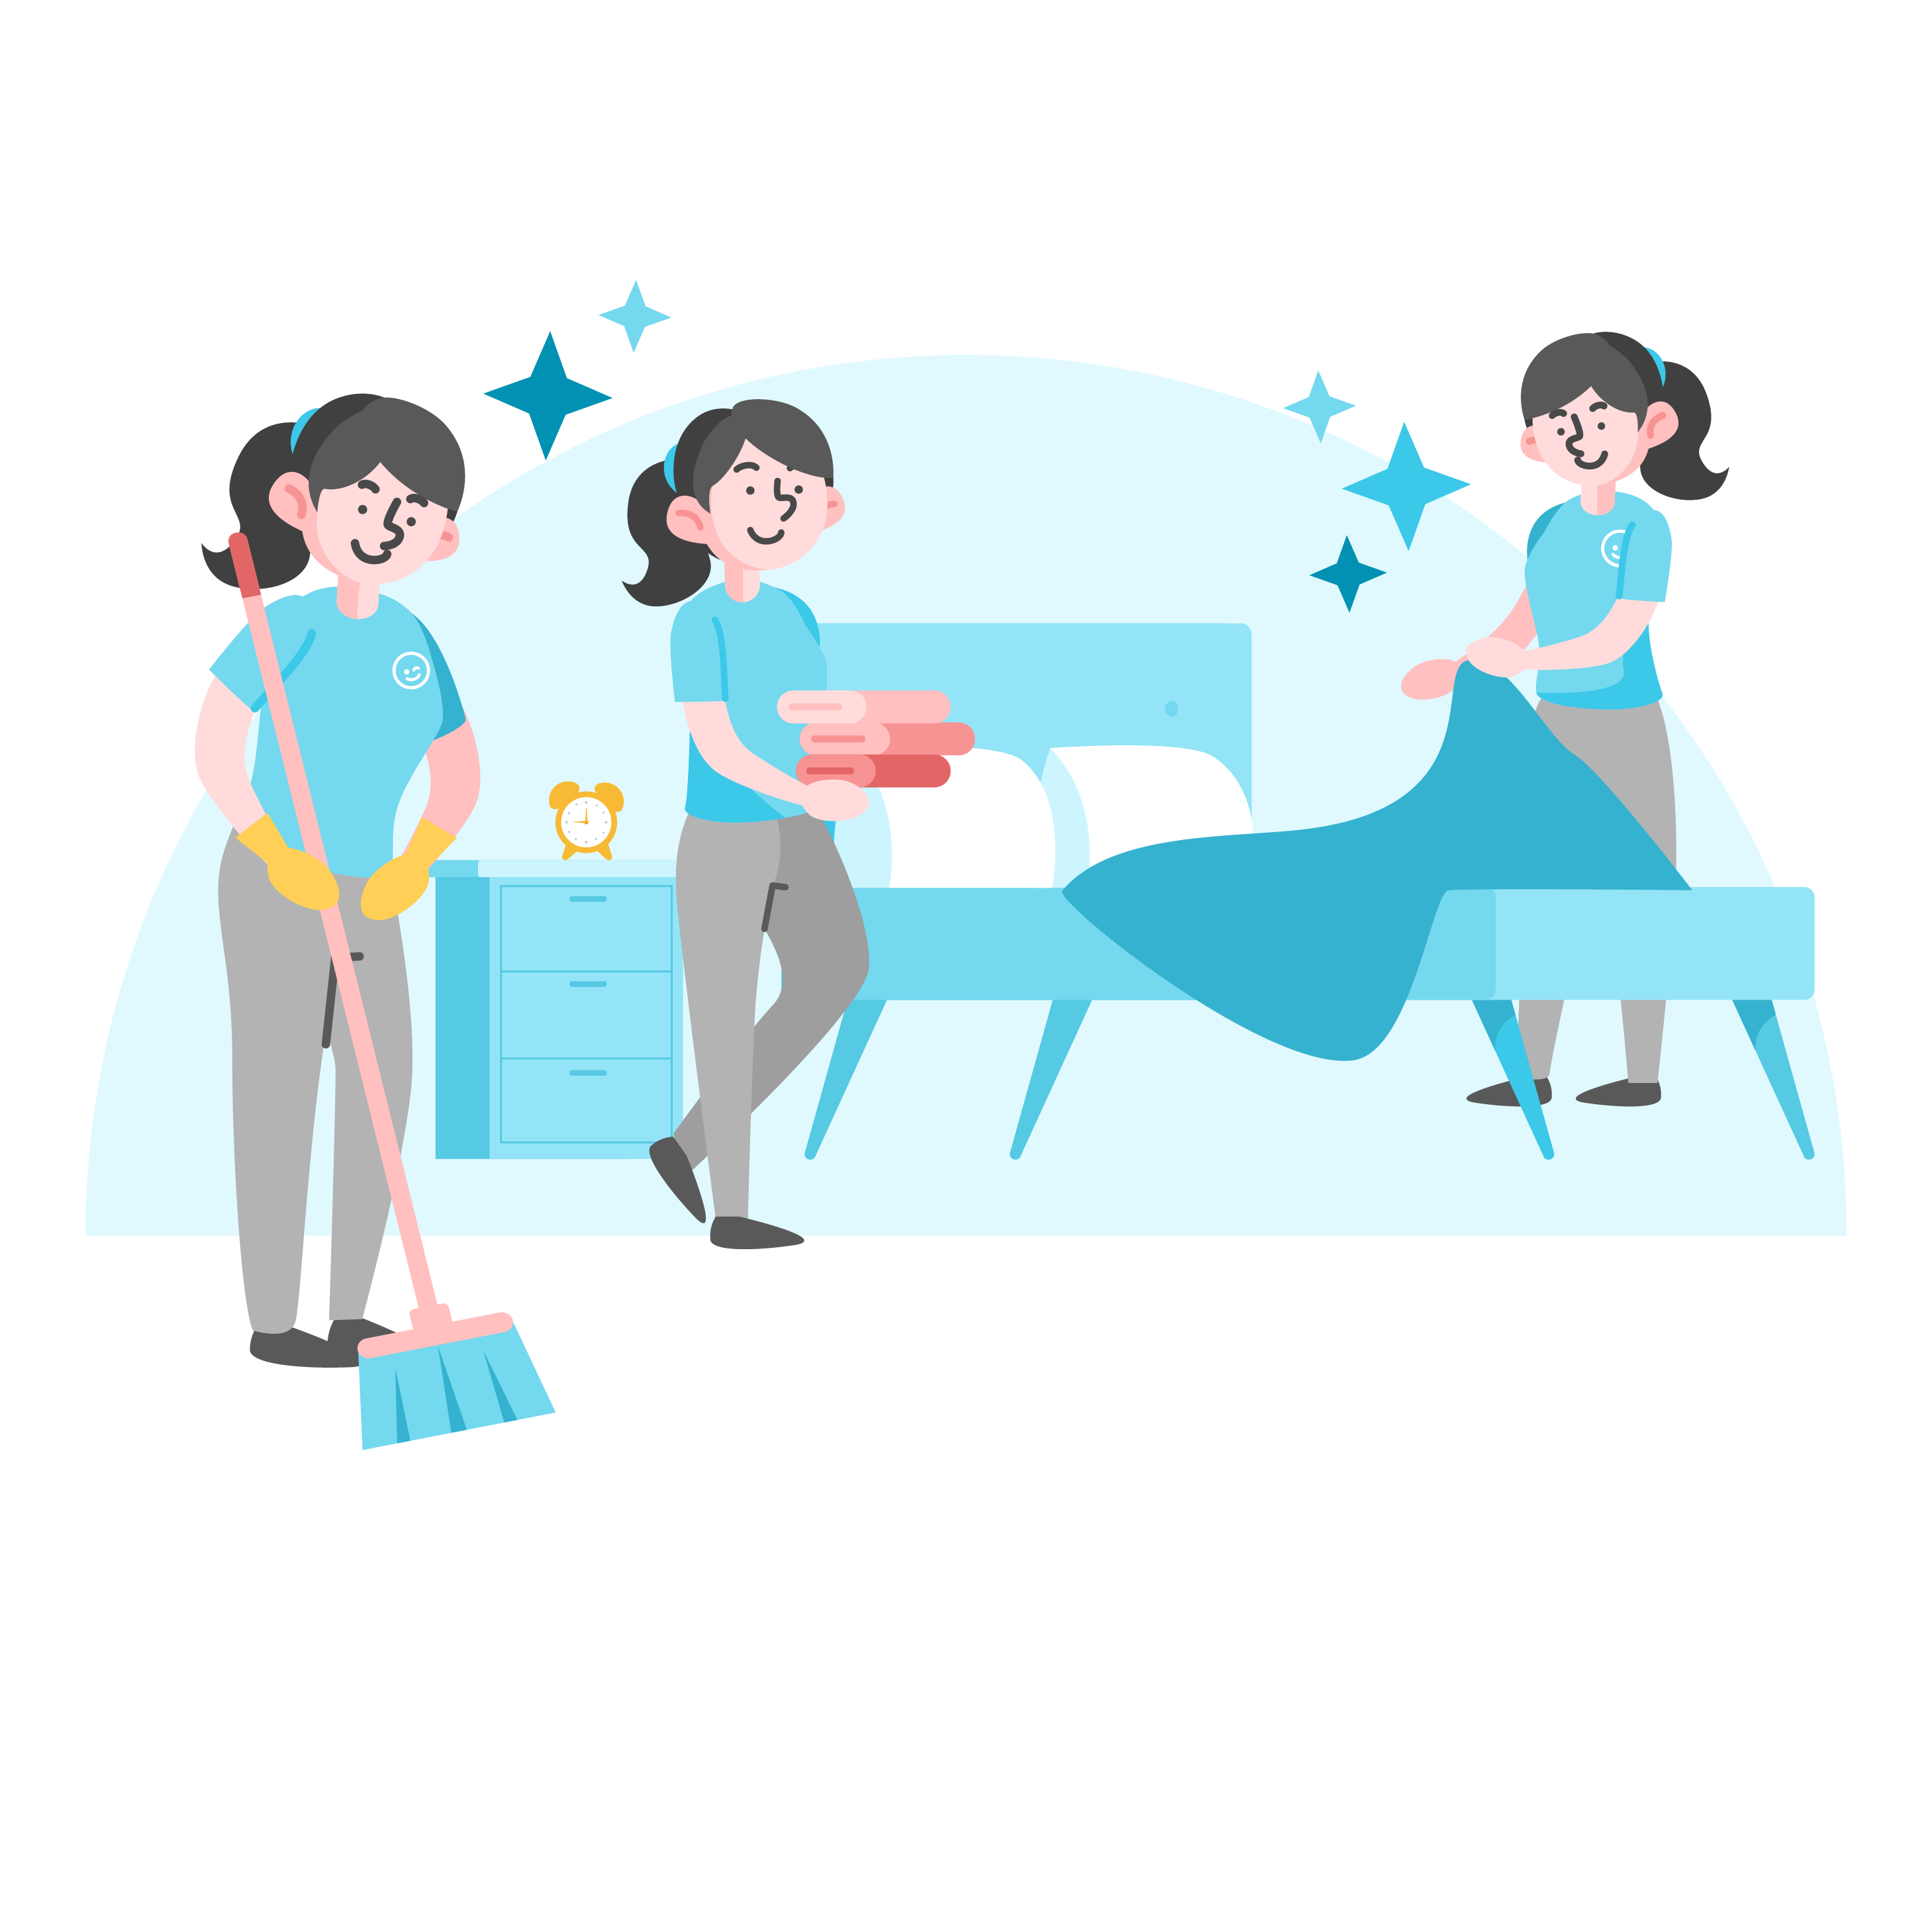 Lazy Household Services Platform Most Popular Services -  Home Cleaning